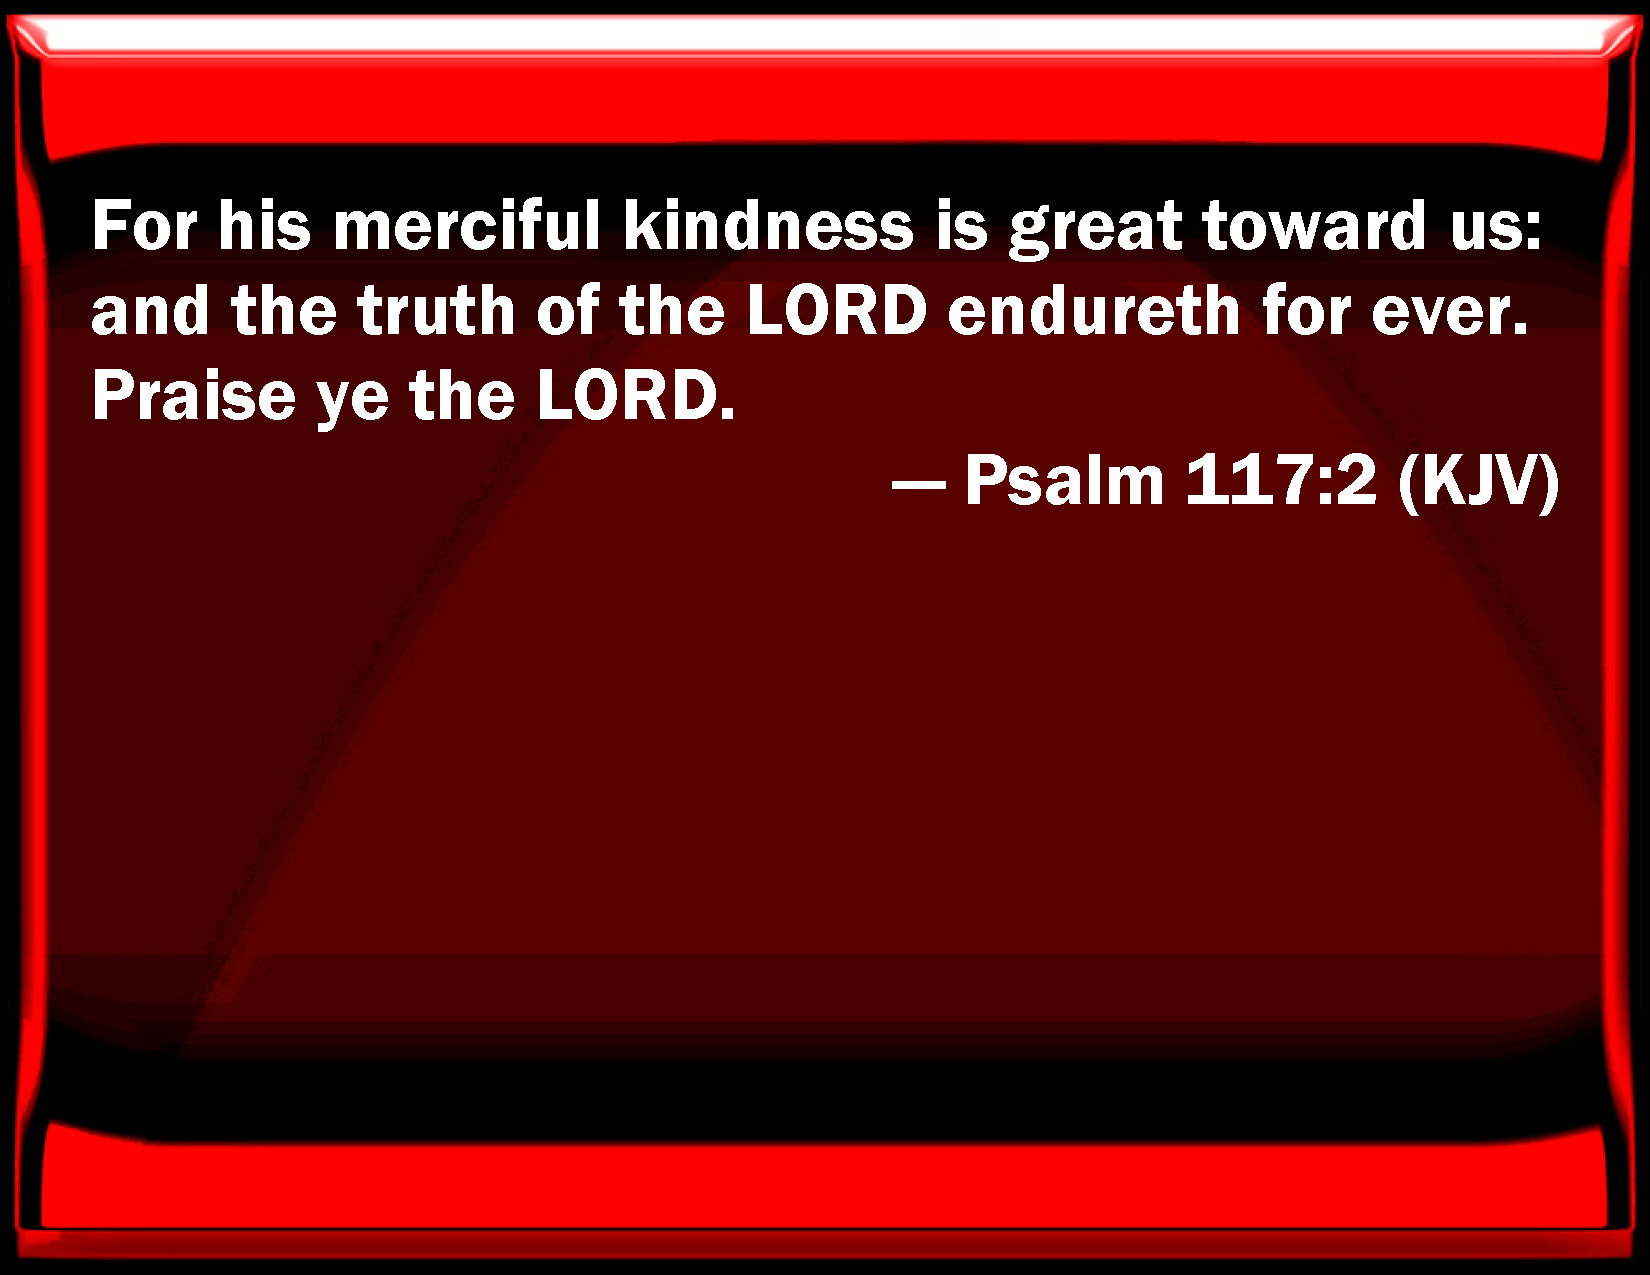 psalm-117-2-for-his-merciful-kindness-is-great-toward-us-and-the-truth